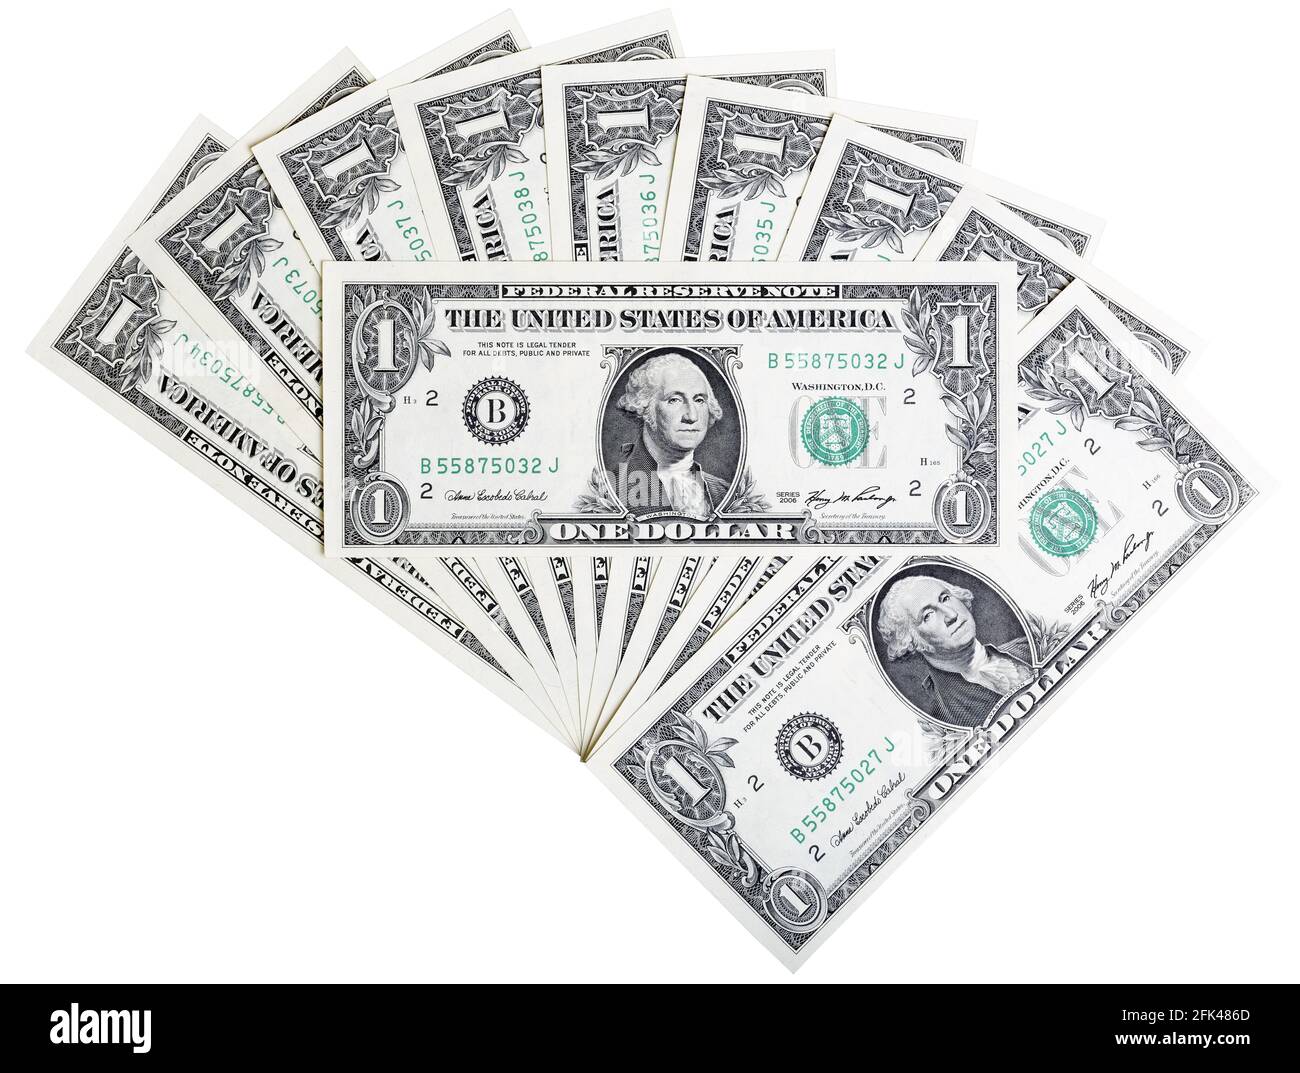 Banknote in one U.S. dollar, abstract background. Stock Photo